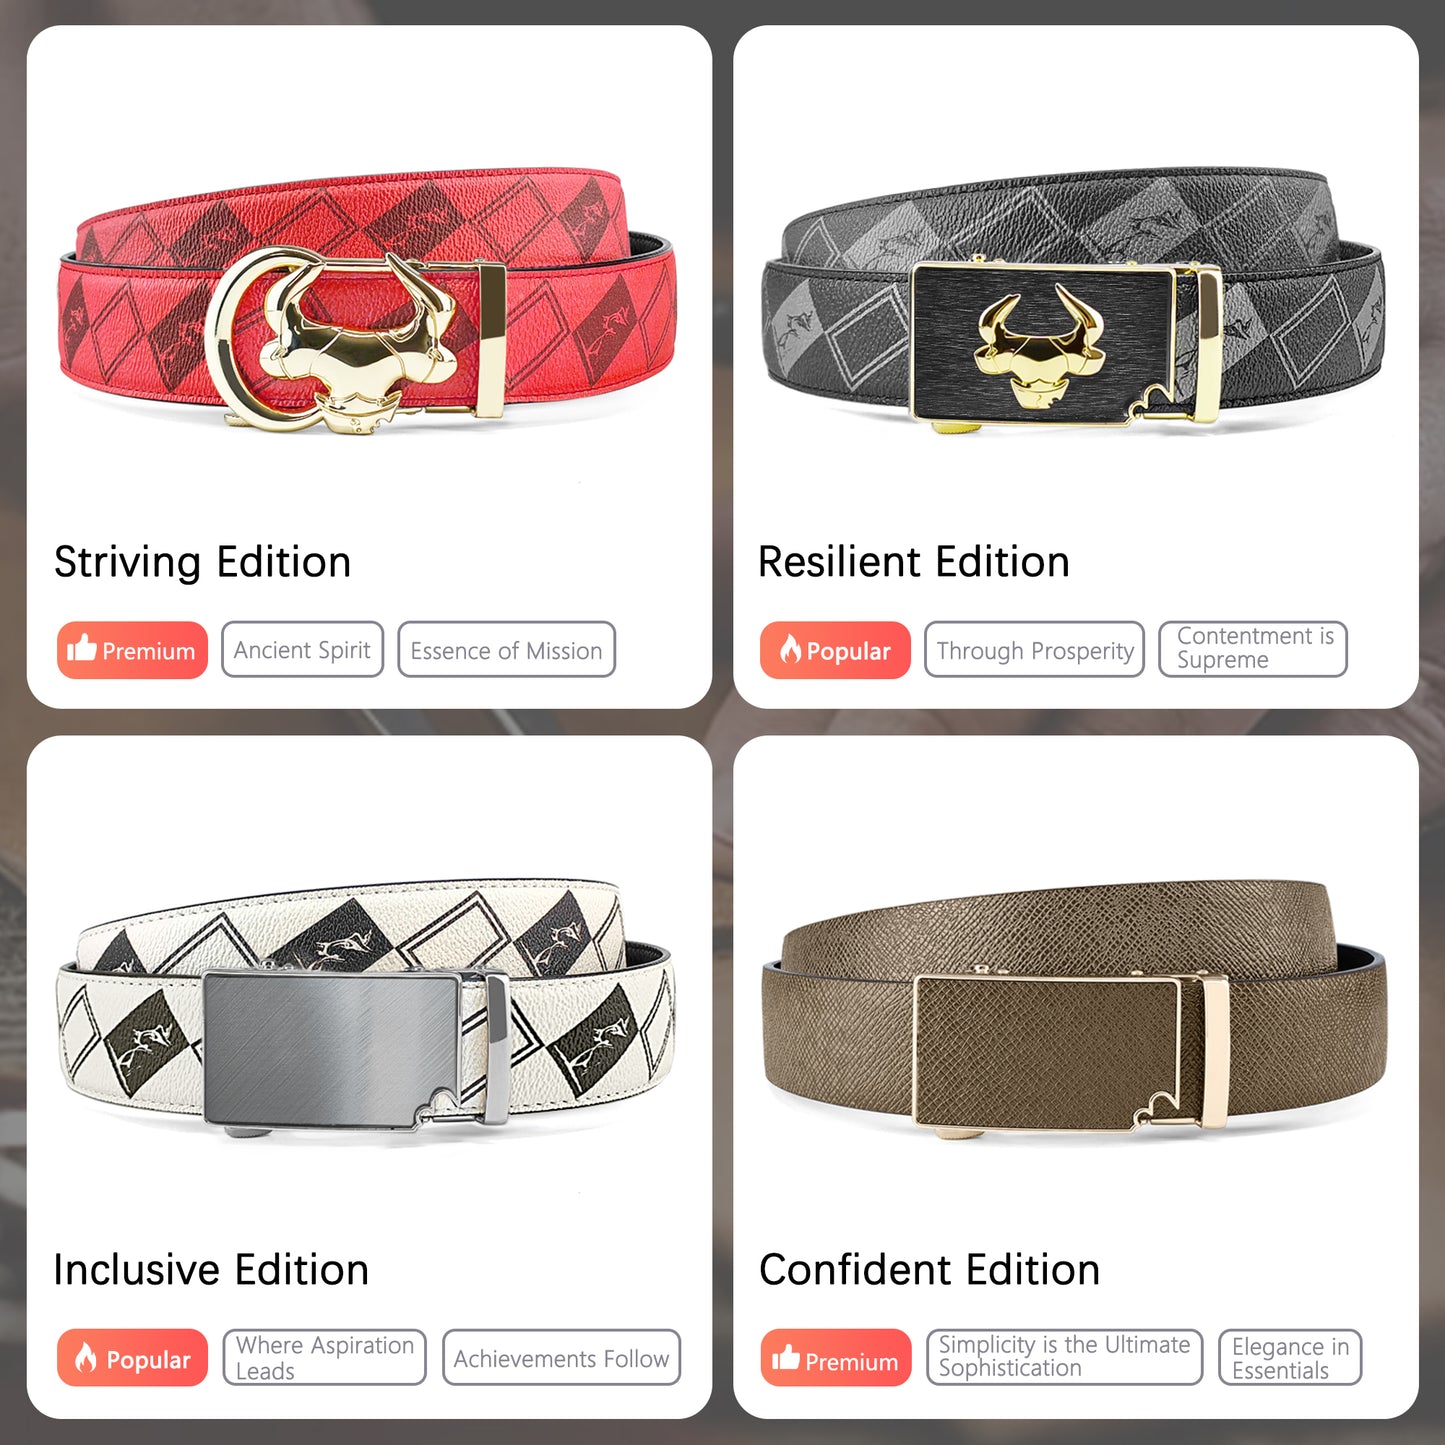 "Luxury at Your Waist: Creative Men's Fashion Belts by COIPDFTY Shine"